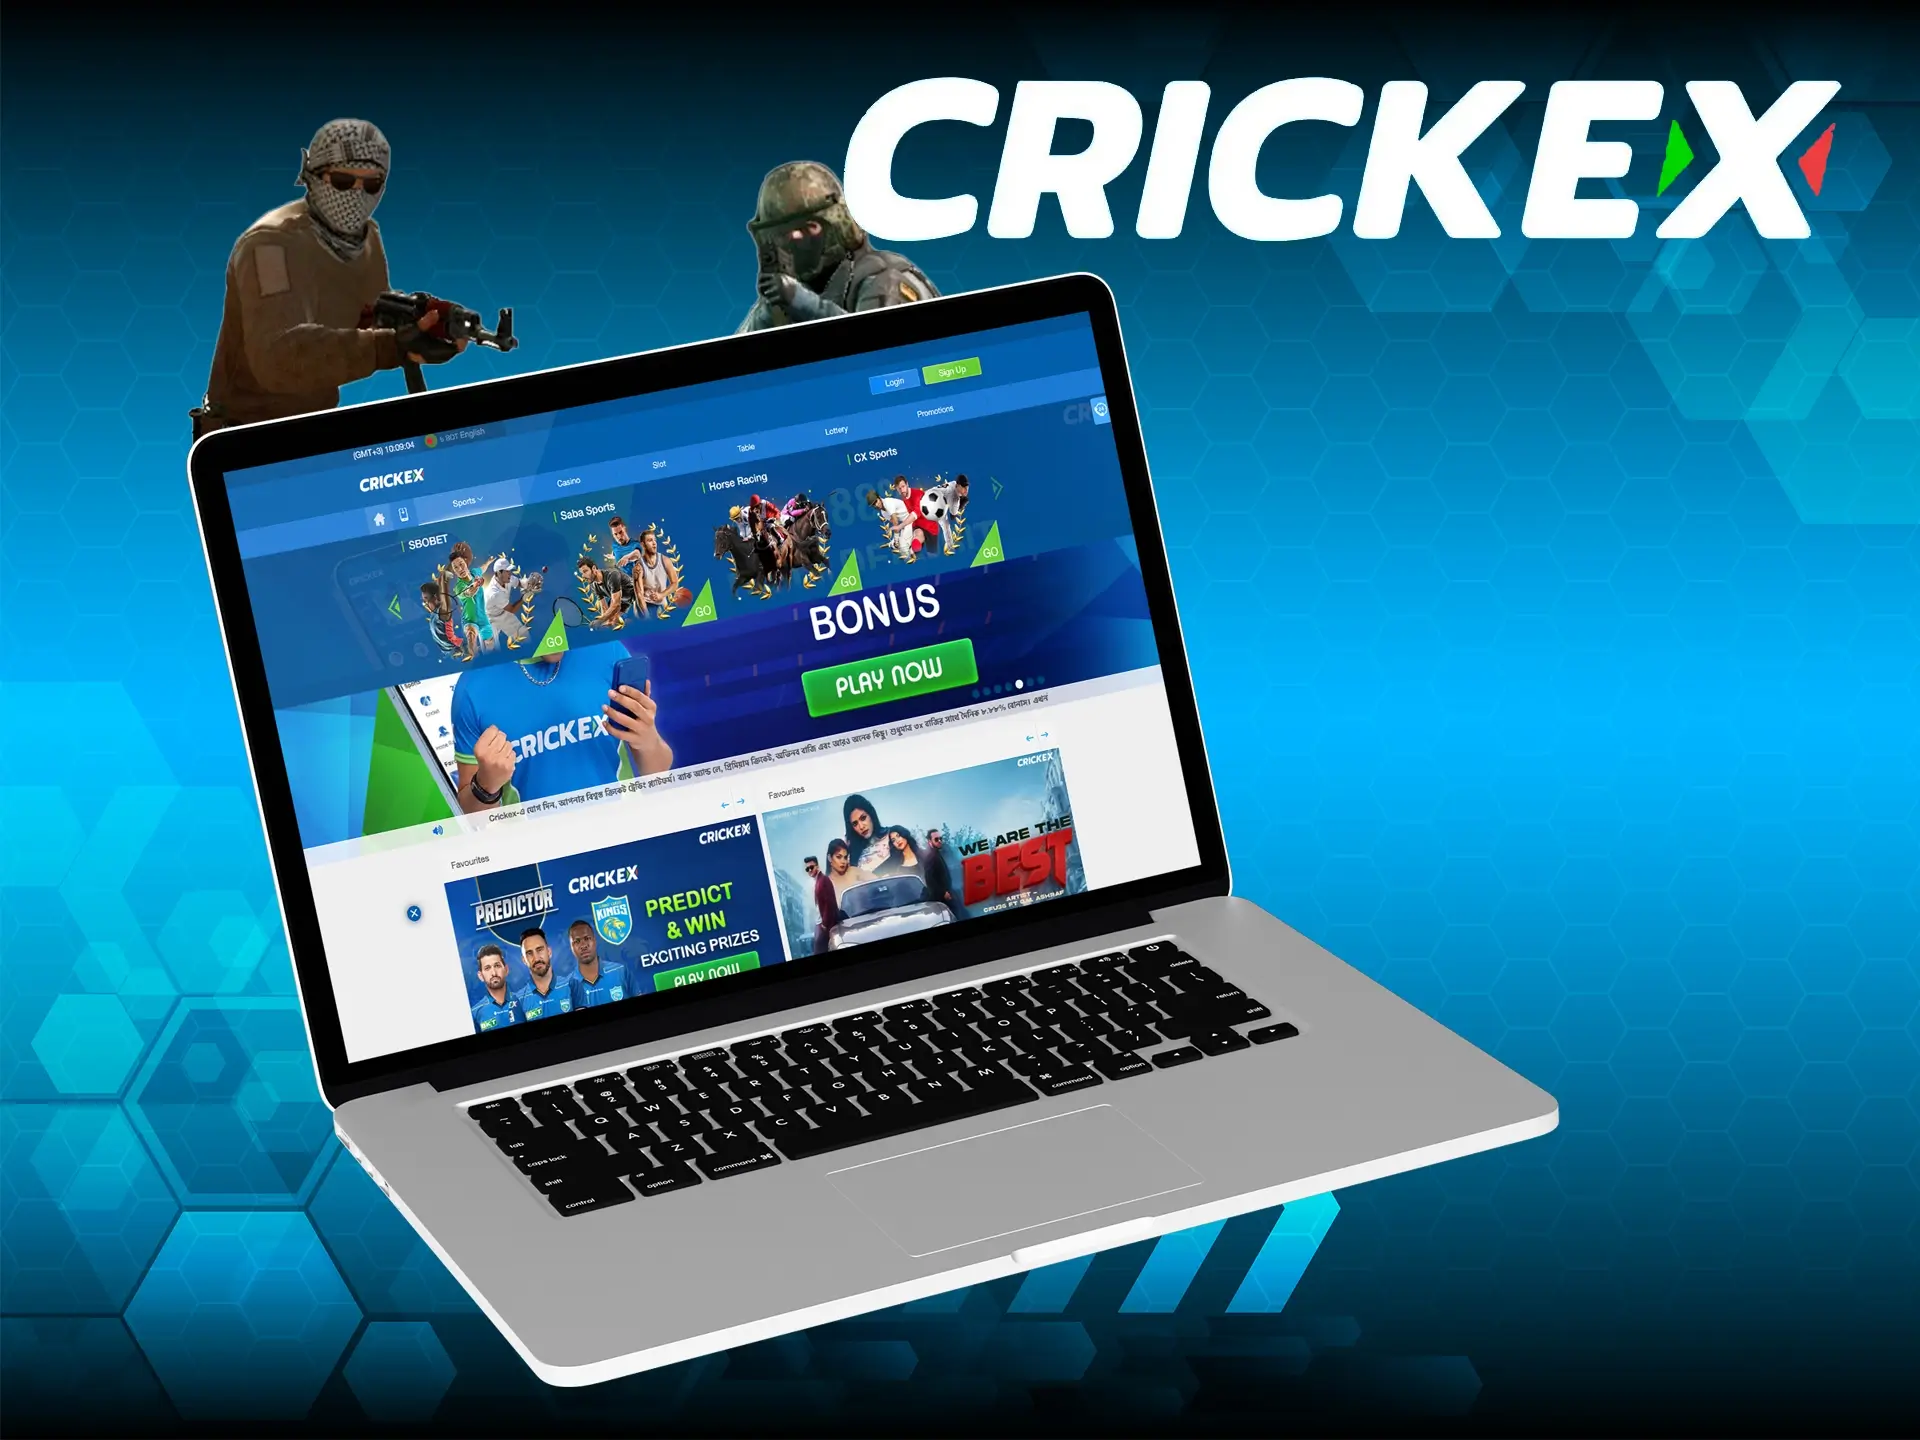 You'll love the cyber sports at Crickex.